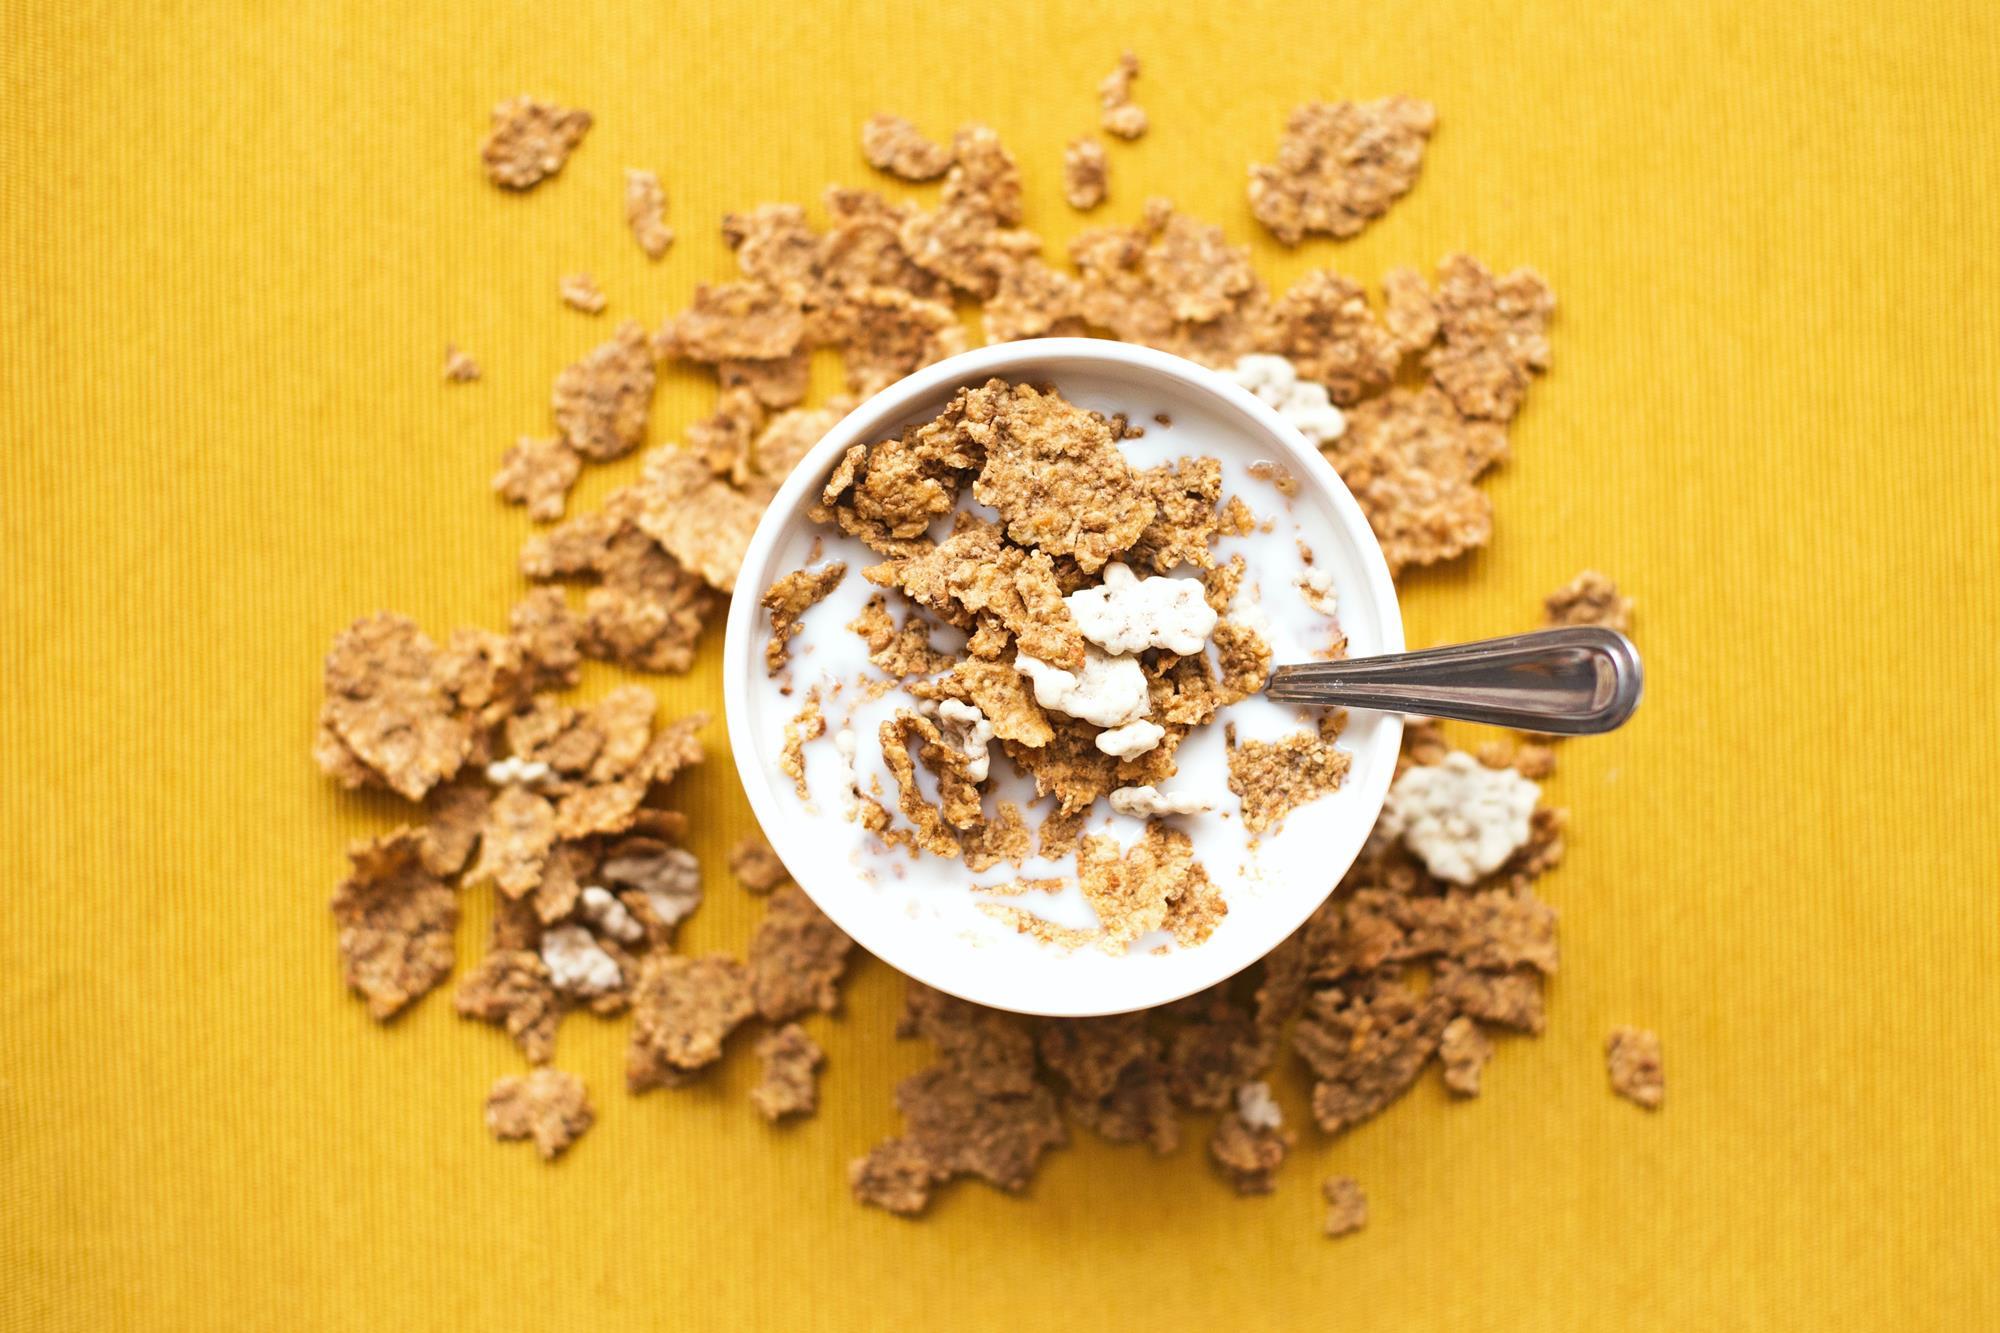 As cereals focus on health, can Kellogg's new Crunchy Nut Salted Caramel  thrive? | Comment & Opinion | The Grocer